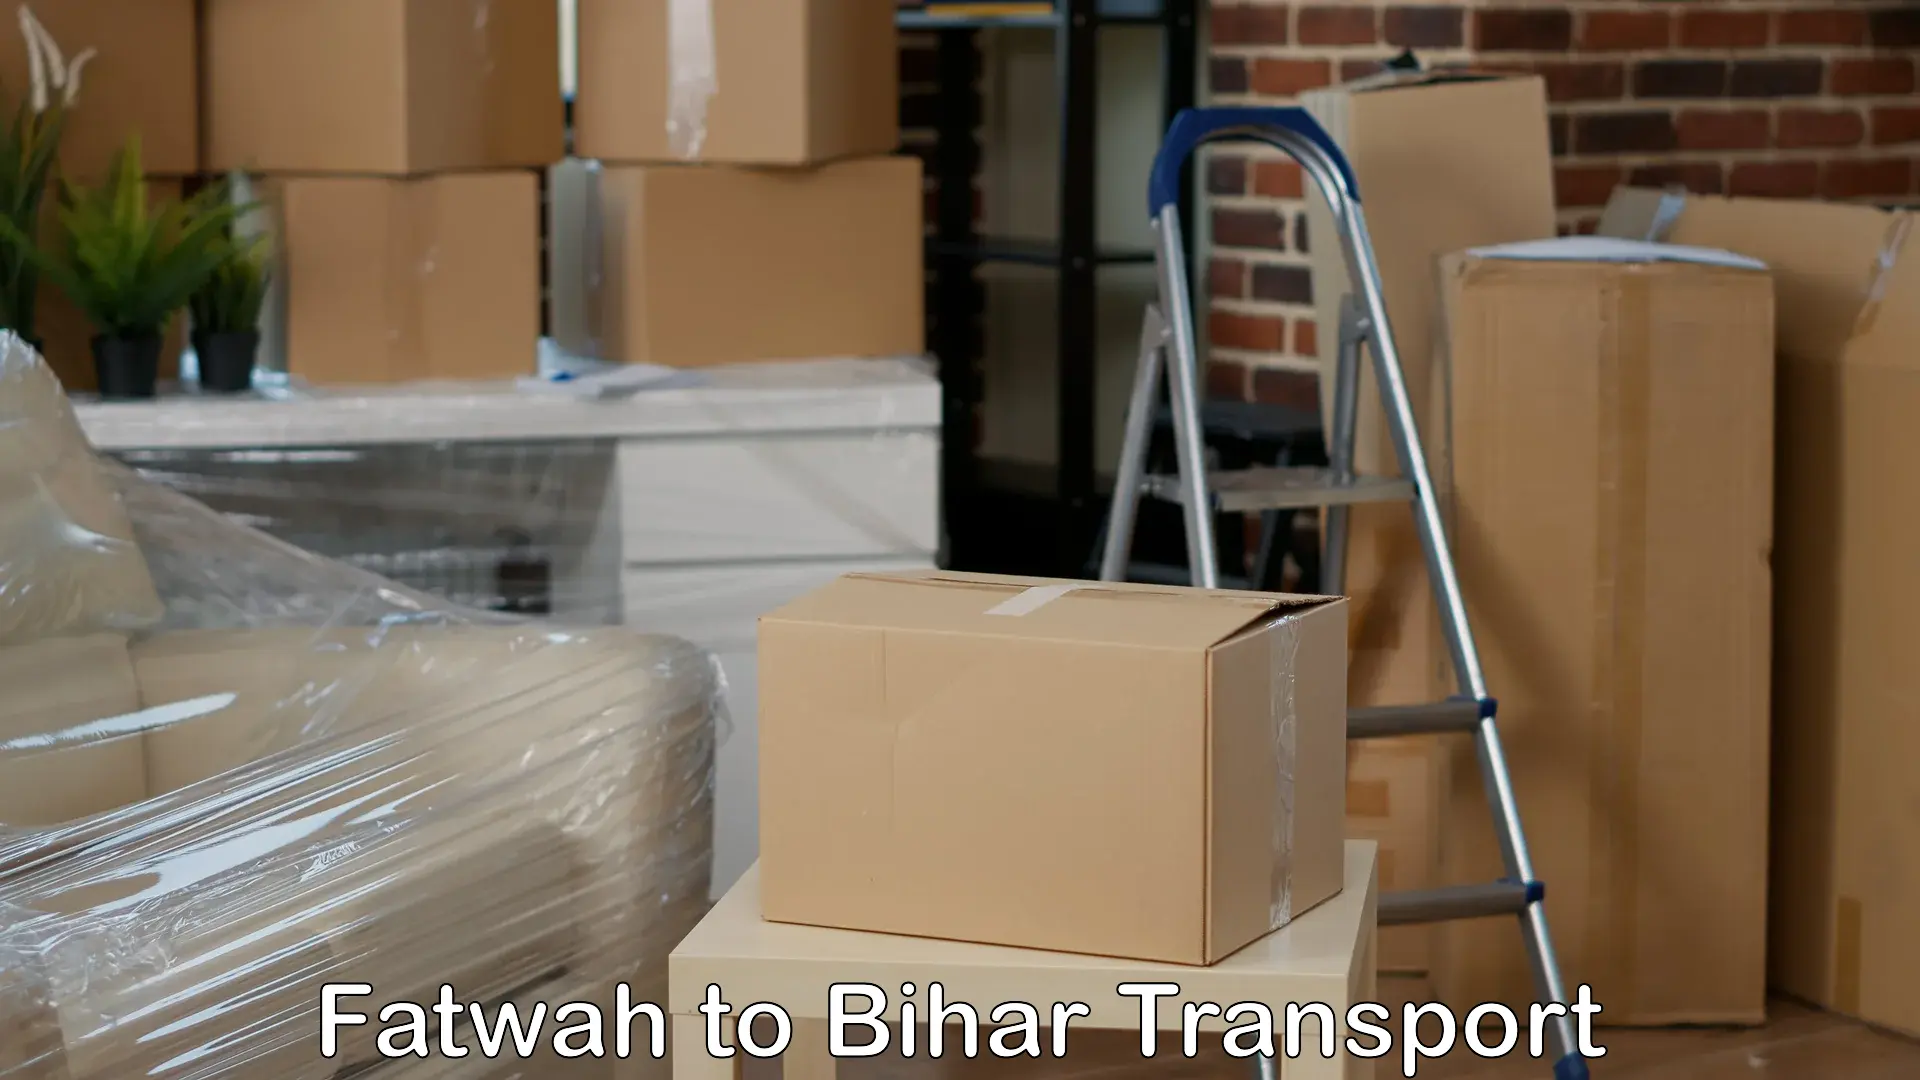 Cargo train transport services Fatwah to Patna